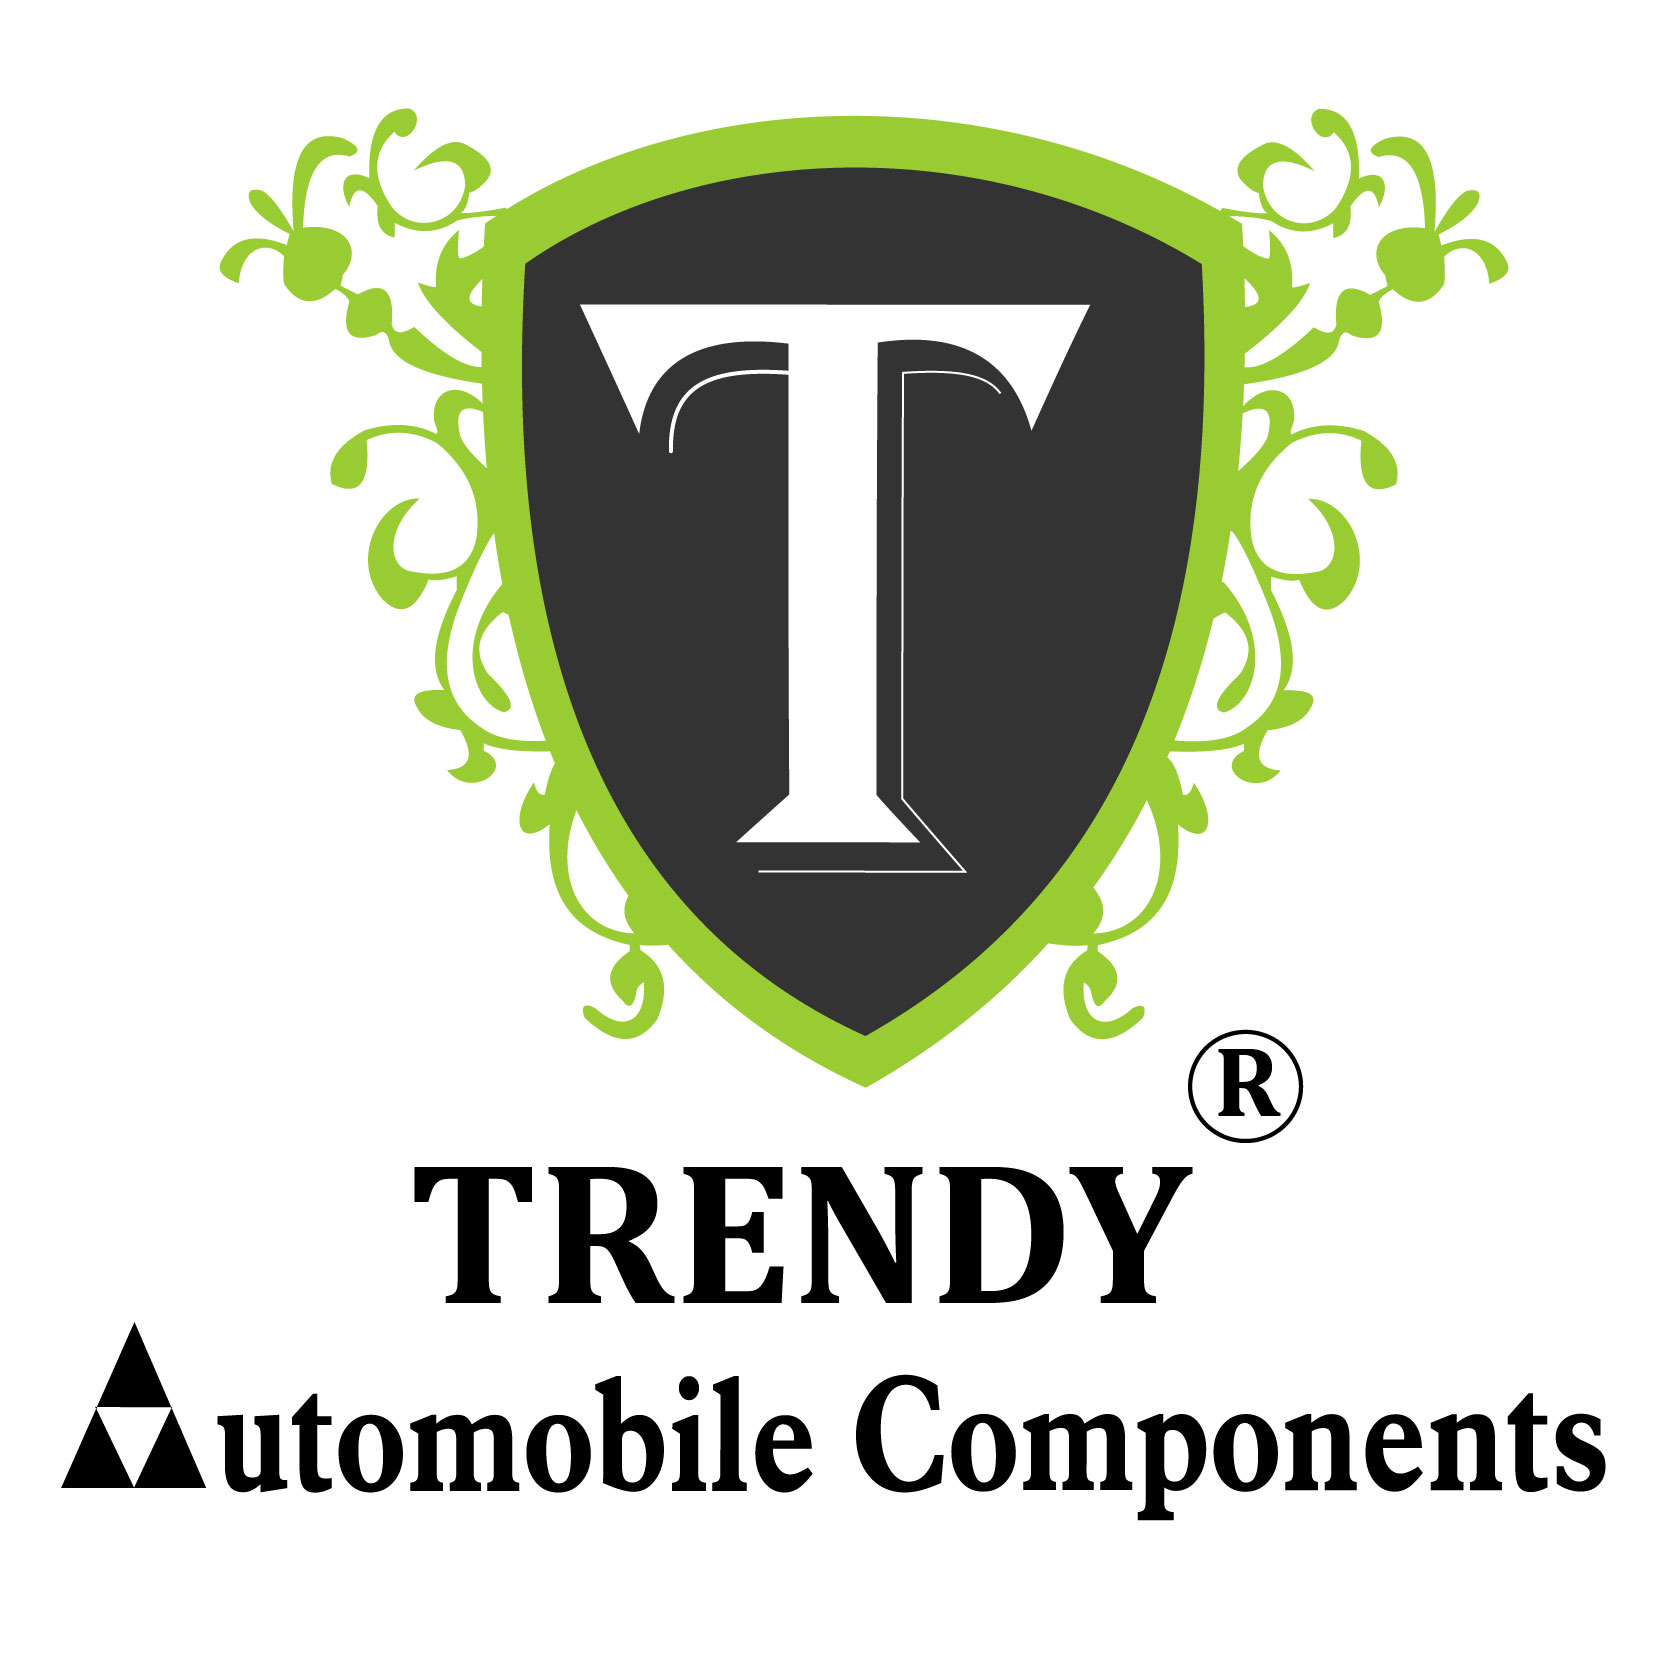 Truck spare parts for OEM repairs and maintenance | 4700+ truck parts catalouge - TRENDY